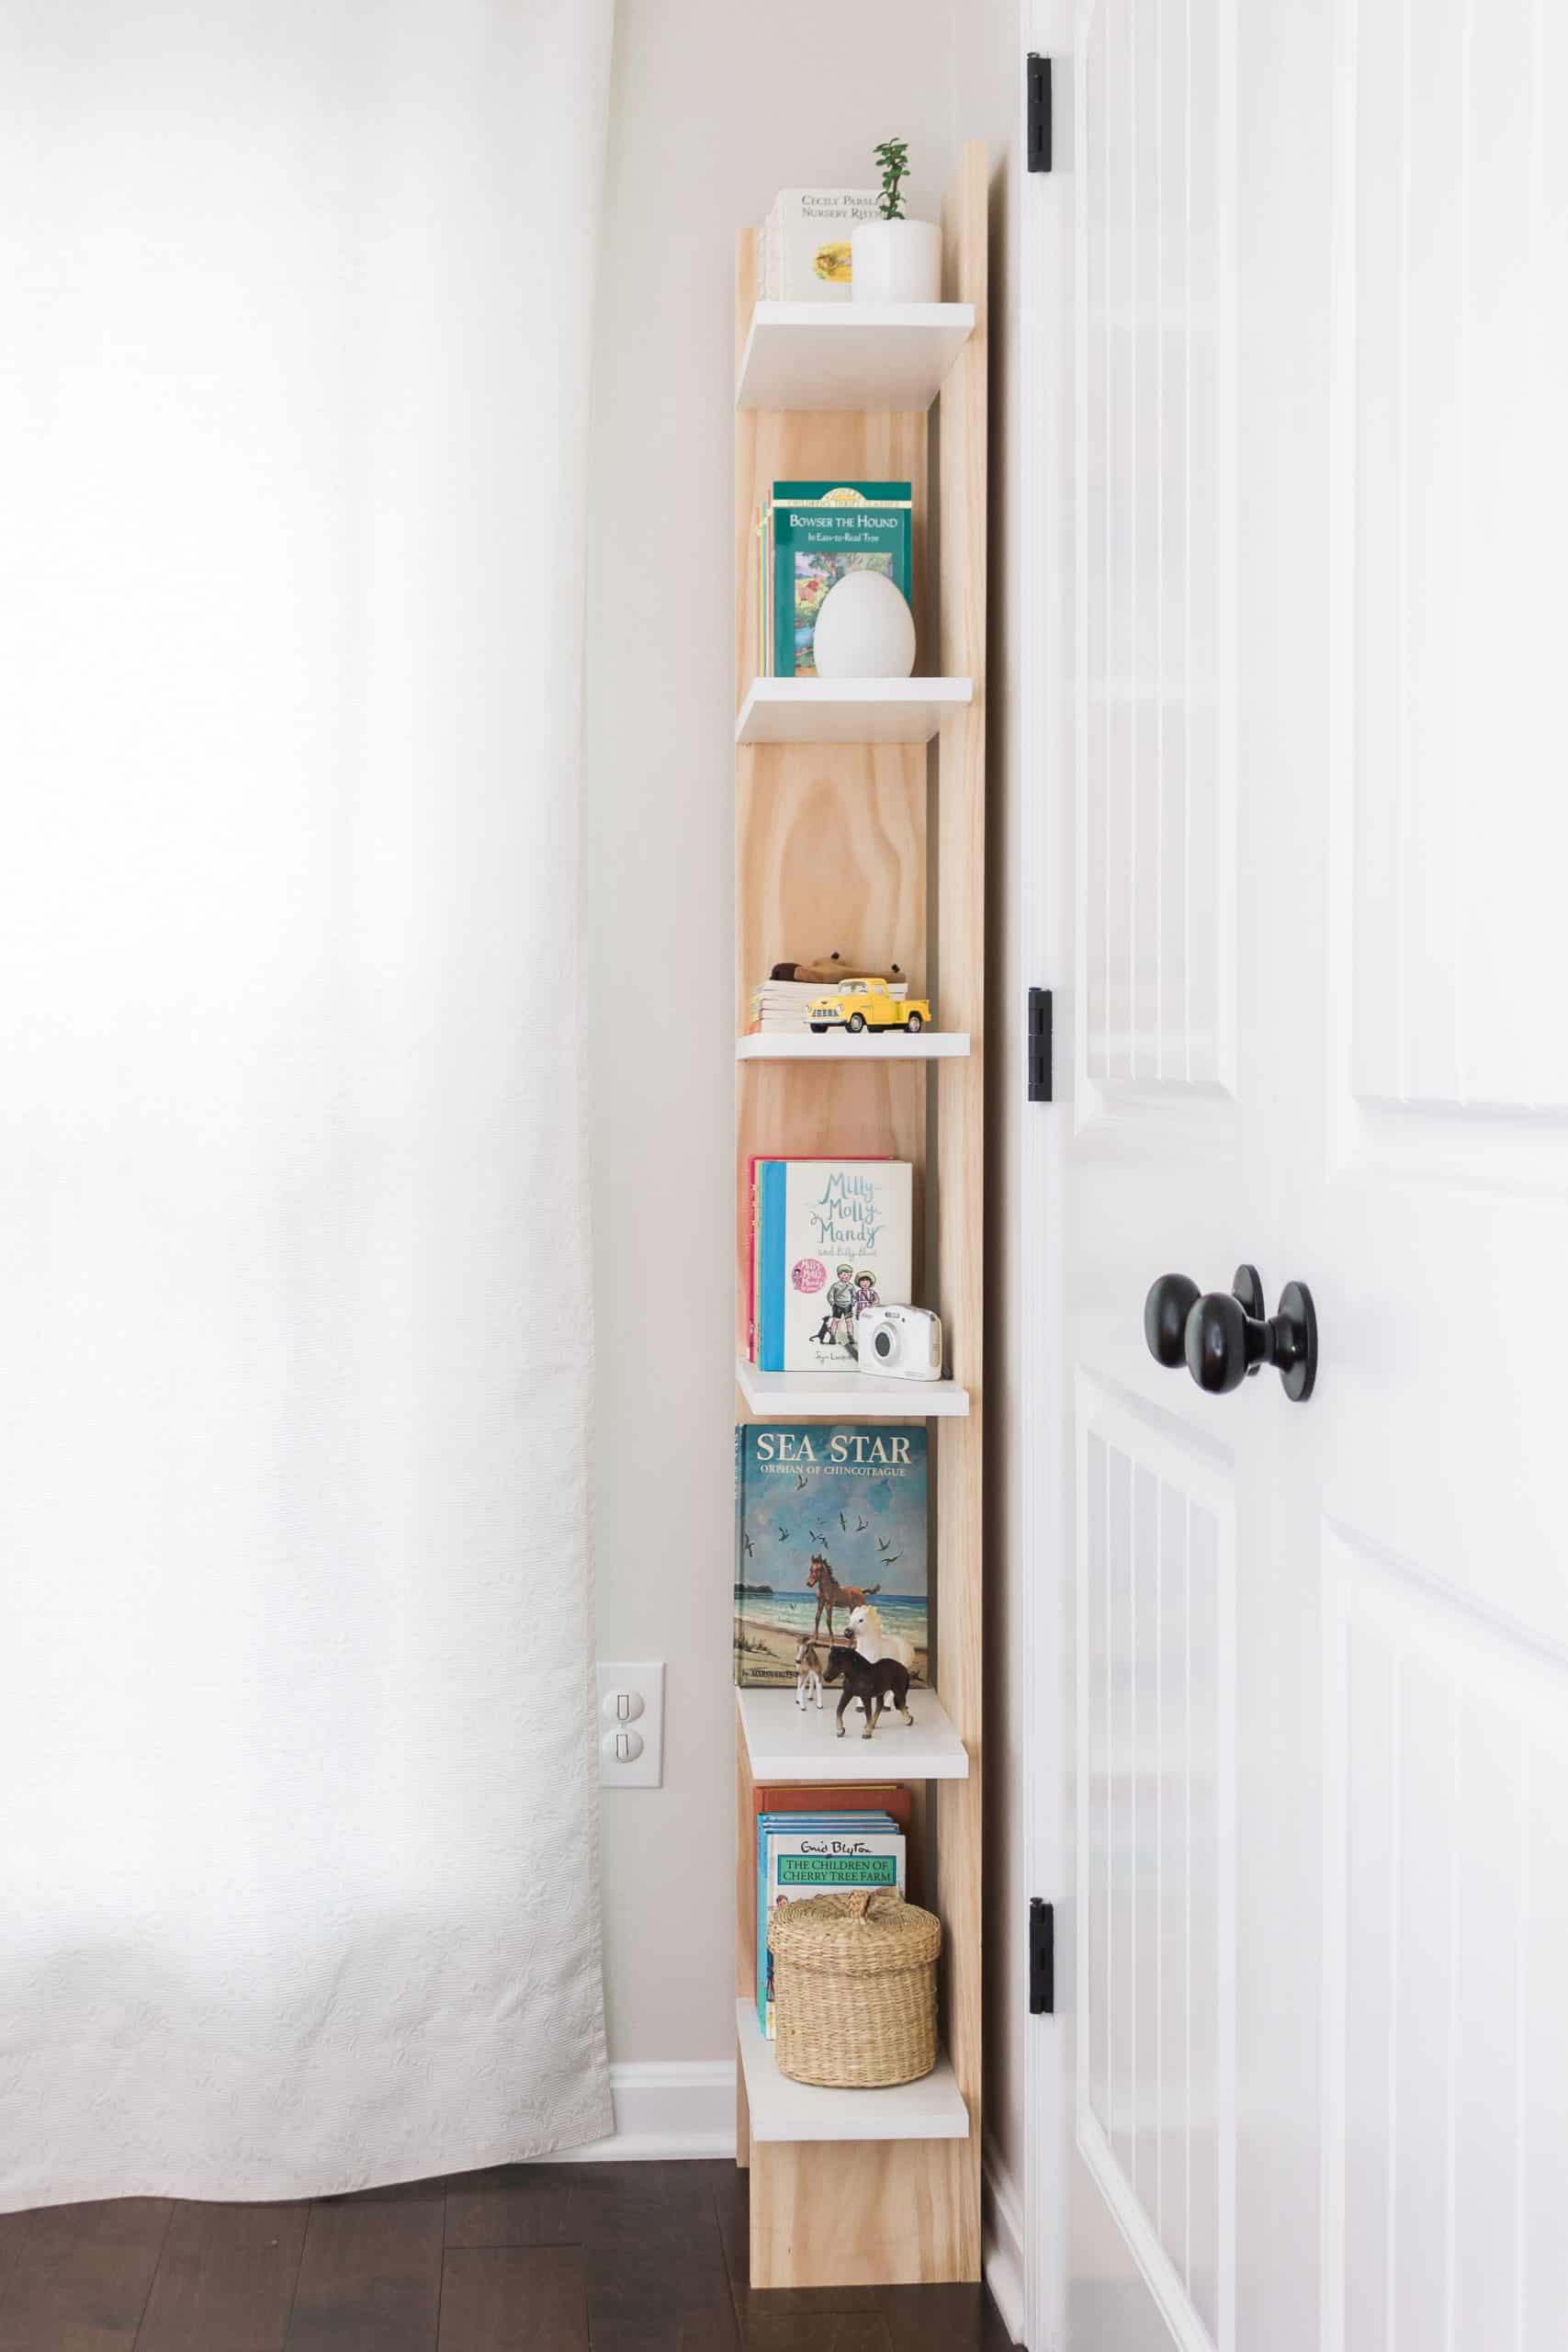 Turn into unused corner into a functional storage space with this easy-to-build and budget-friendly bookcase! You can build it in a day for just $60 dollars. See the complete tutorial at www.freeandunfettered.com. It's perfect for small space living! #diy #bookcase #bookstorage #diyfurniture #modernhome #homeorganization #storageandorganization #diyproject #budgetfriendlydecor #smallspaceliving